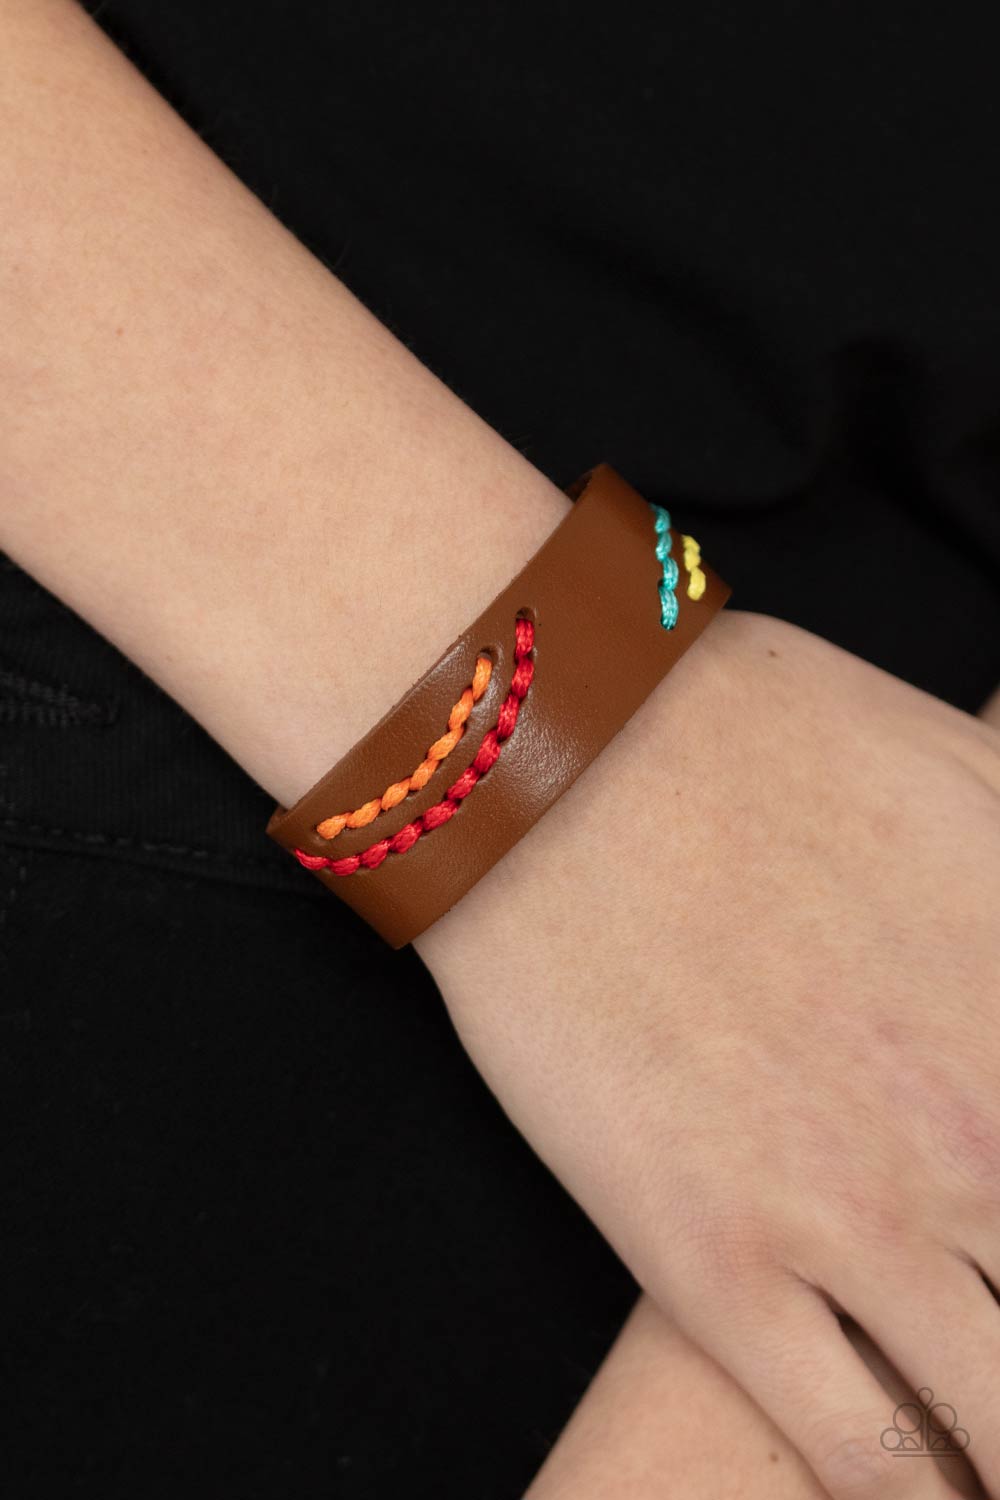 &lt;p&gt;Multicolored cording is stitched across the front of a brown leather band, creating curved patterns. Features an adjustable snap closure. &lt;/p&gt;

&lt;p&gt;&lt;i&gt; Sold as one individual bracelet.&lt;/i&gt;&lt;/p&gt;


&lt;img src=\&quot;https://d9b54x484lq62.cloudfront.net/paparazzi/shopping/images/517_tag150x115_1.png\&quot; alt=\&quot;New Kit\&quot; align=\&quot;middle\&quot; height=\&quot;50\&quot; width=\&quot;50\&quot;&gt;